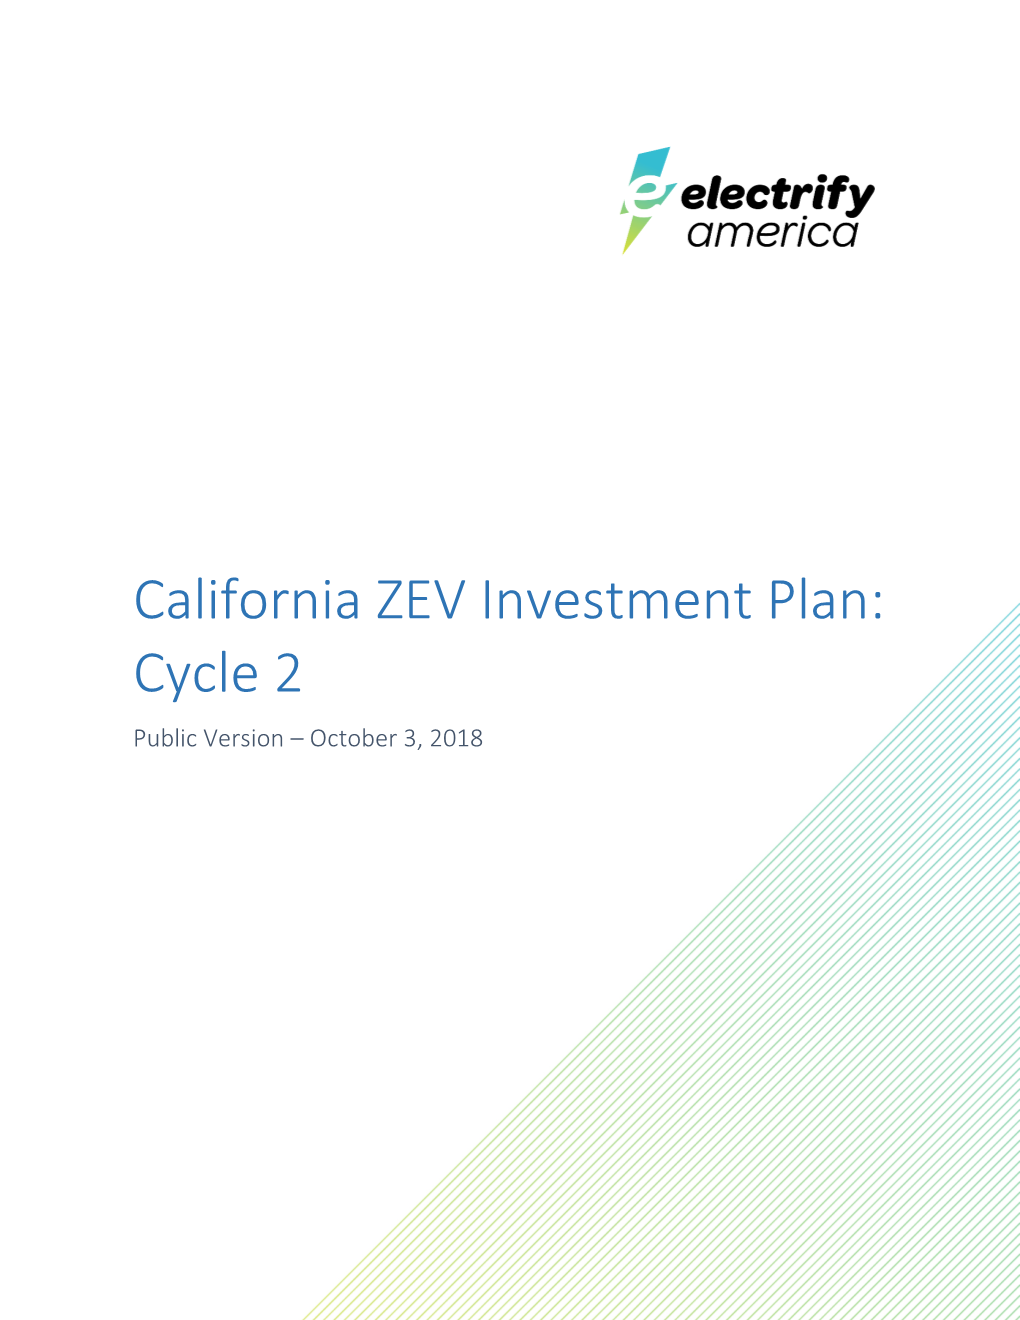 Cycle 2 California ZEV Investment Plan